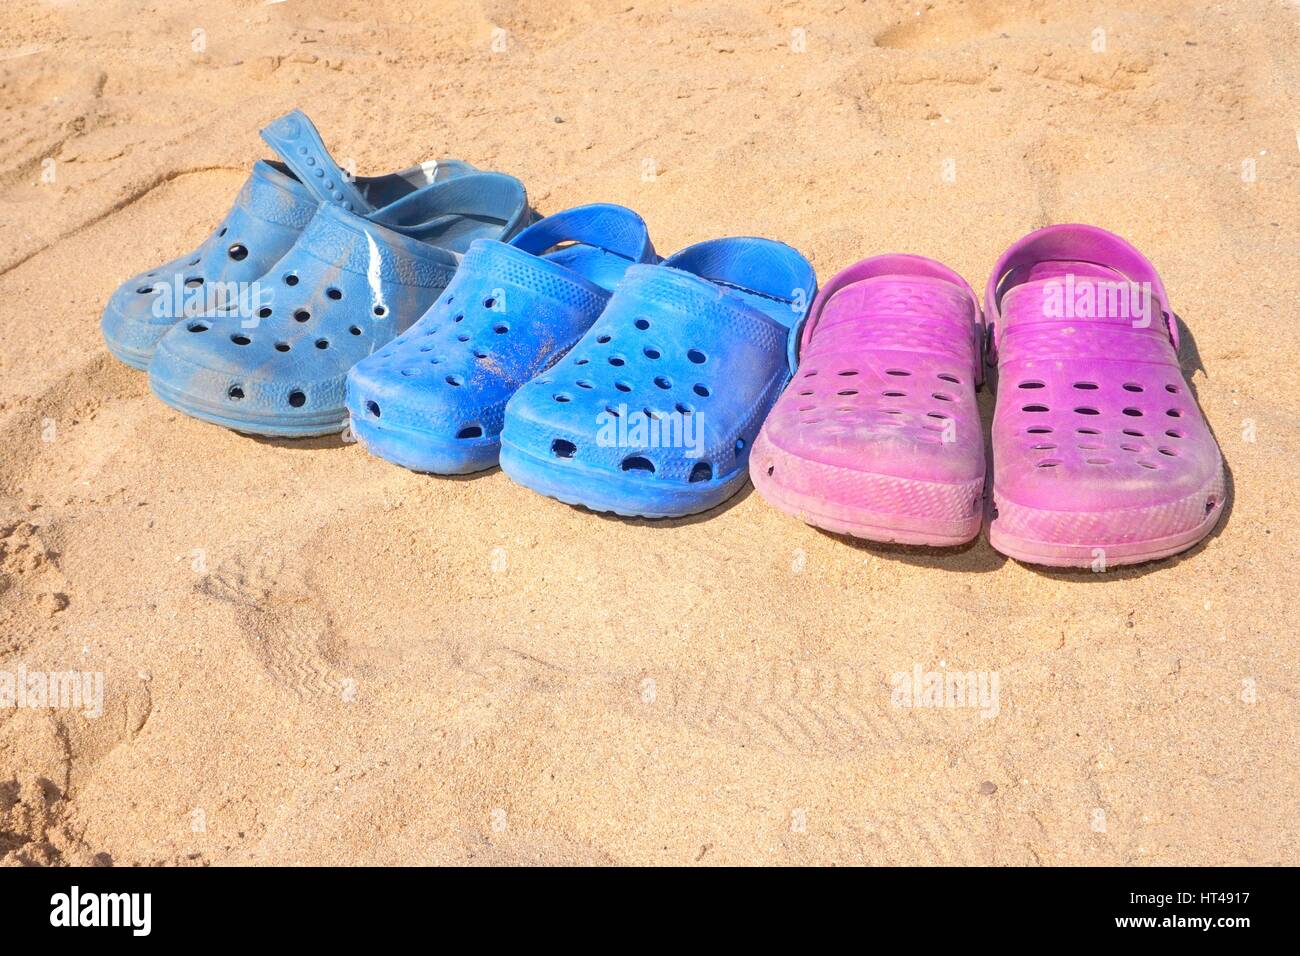 Family Shoes Row High Resolution Stock Photography and Images - Alamy